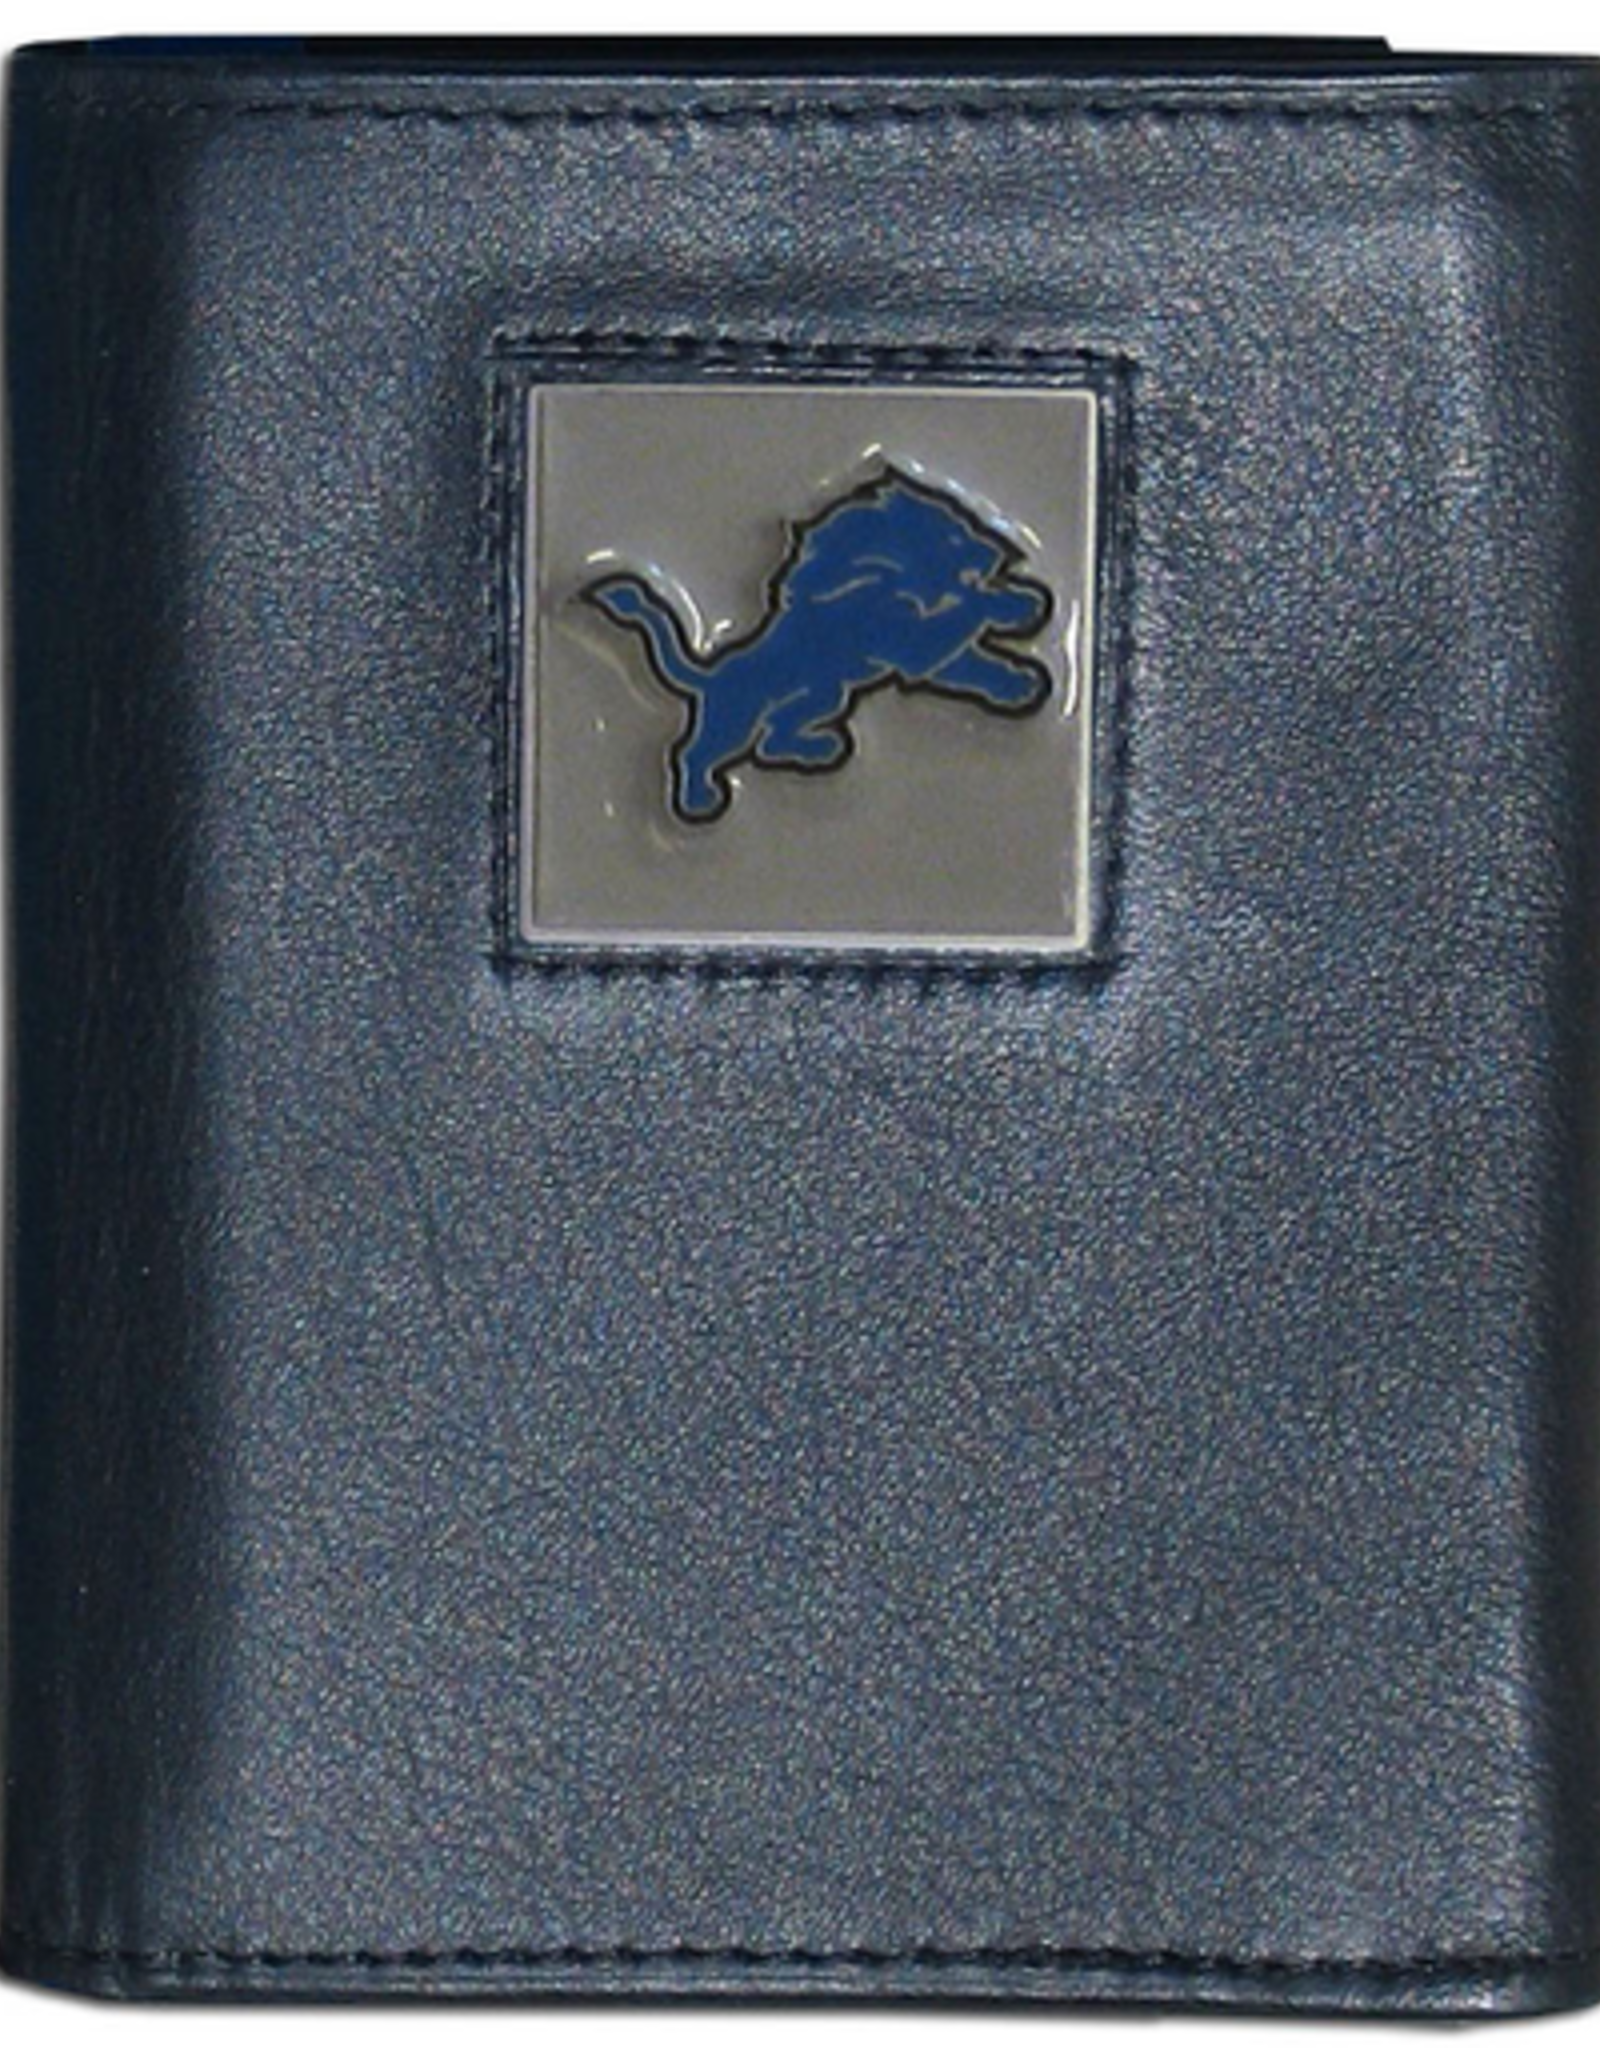 SISKIYOU GIFTS Detriot Lions Executive Leather Trifold Wallet